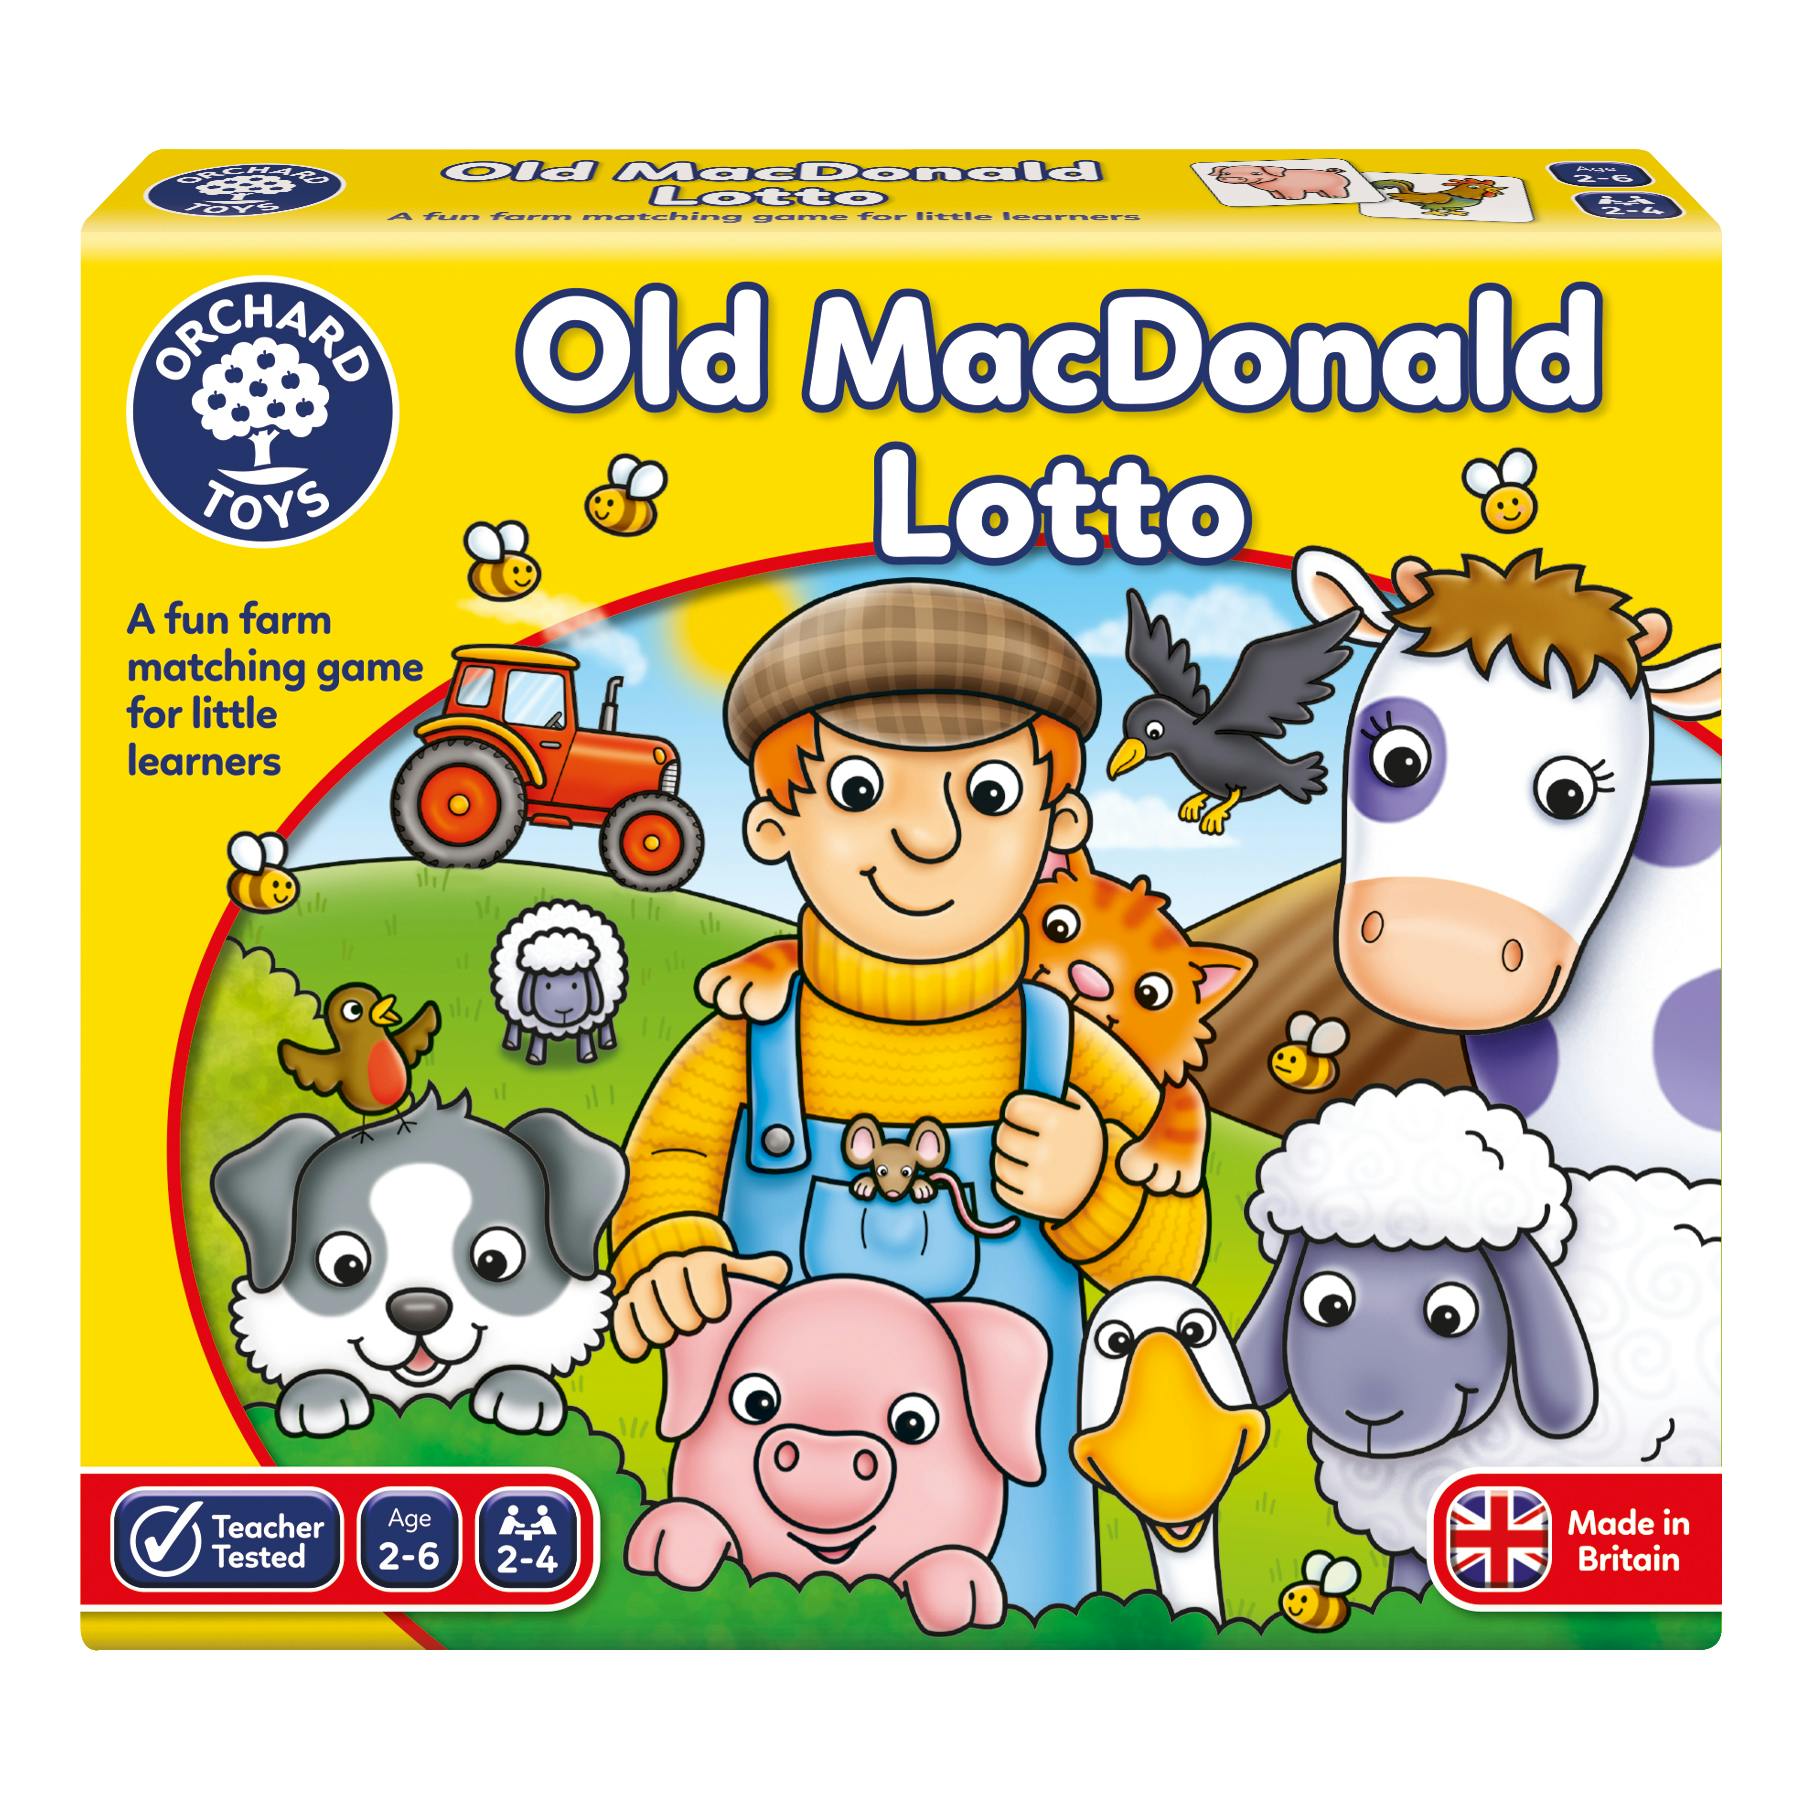 Orchard Old Macdonald Lotto game 